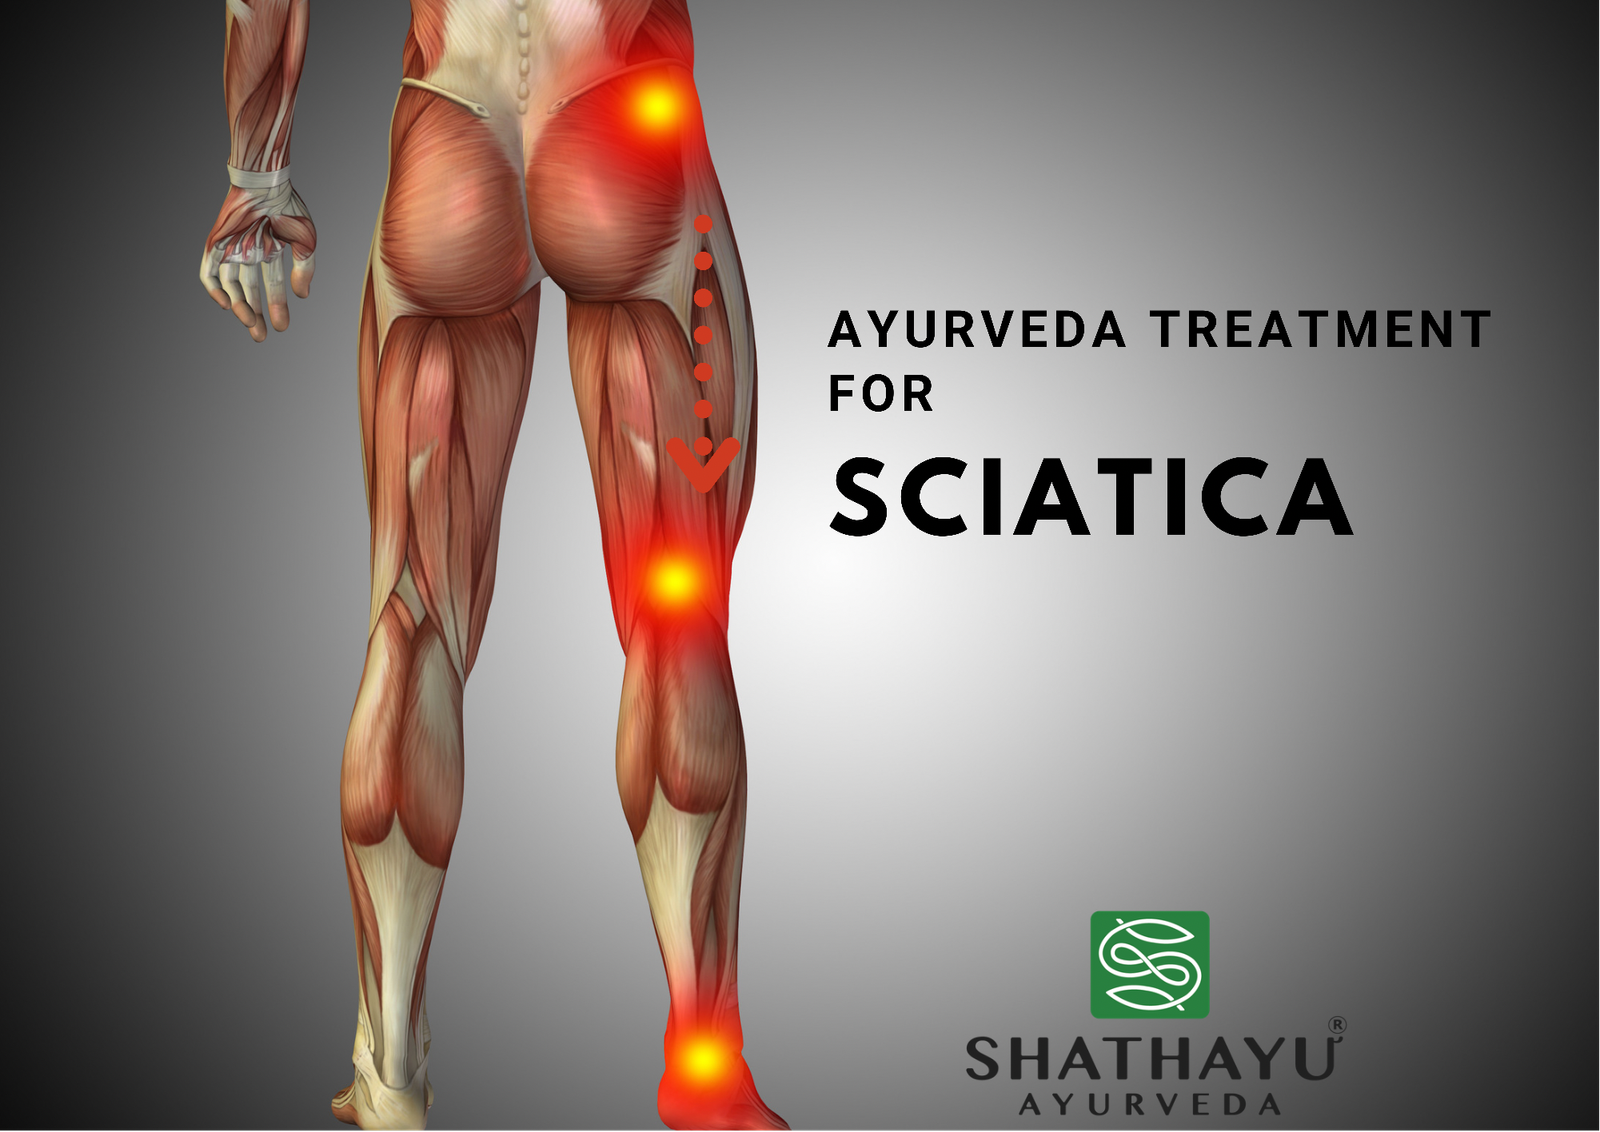 What Will The Hospital Do For Sciatica Pain? Anything?